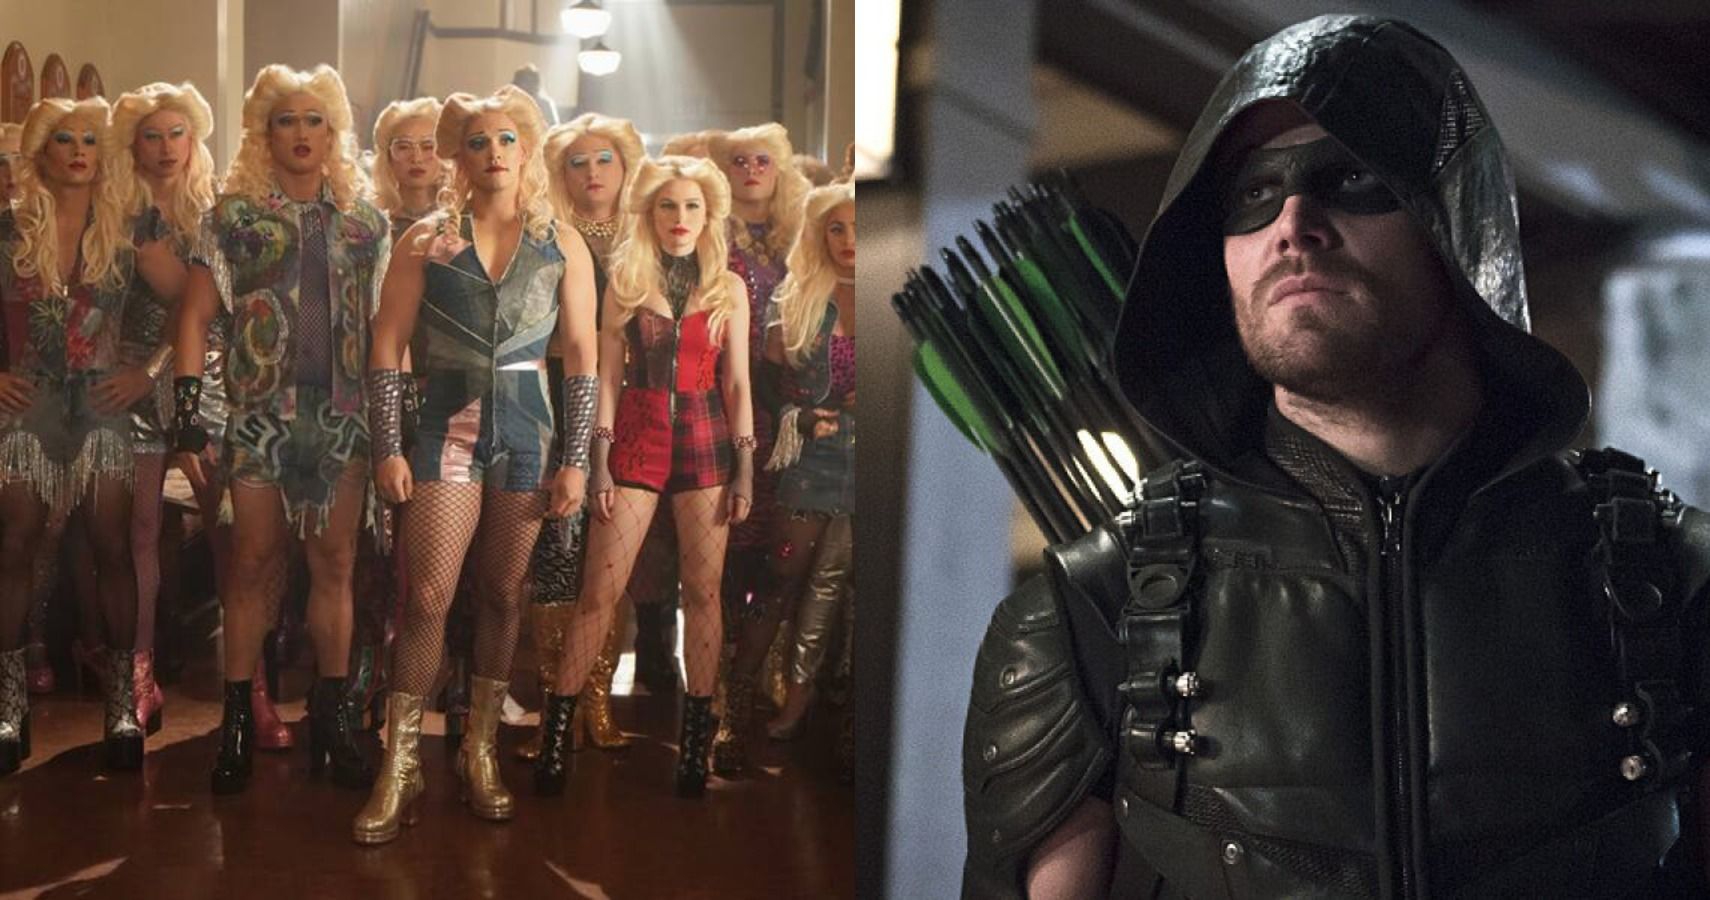 An image from a musical episode of Riverdale next to an image from an action scene from Arrow.